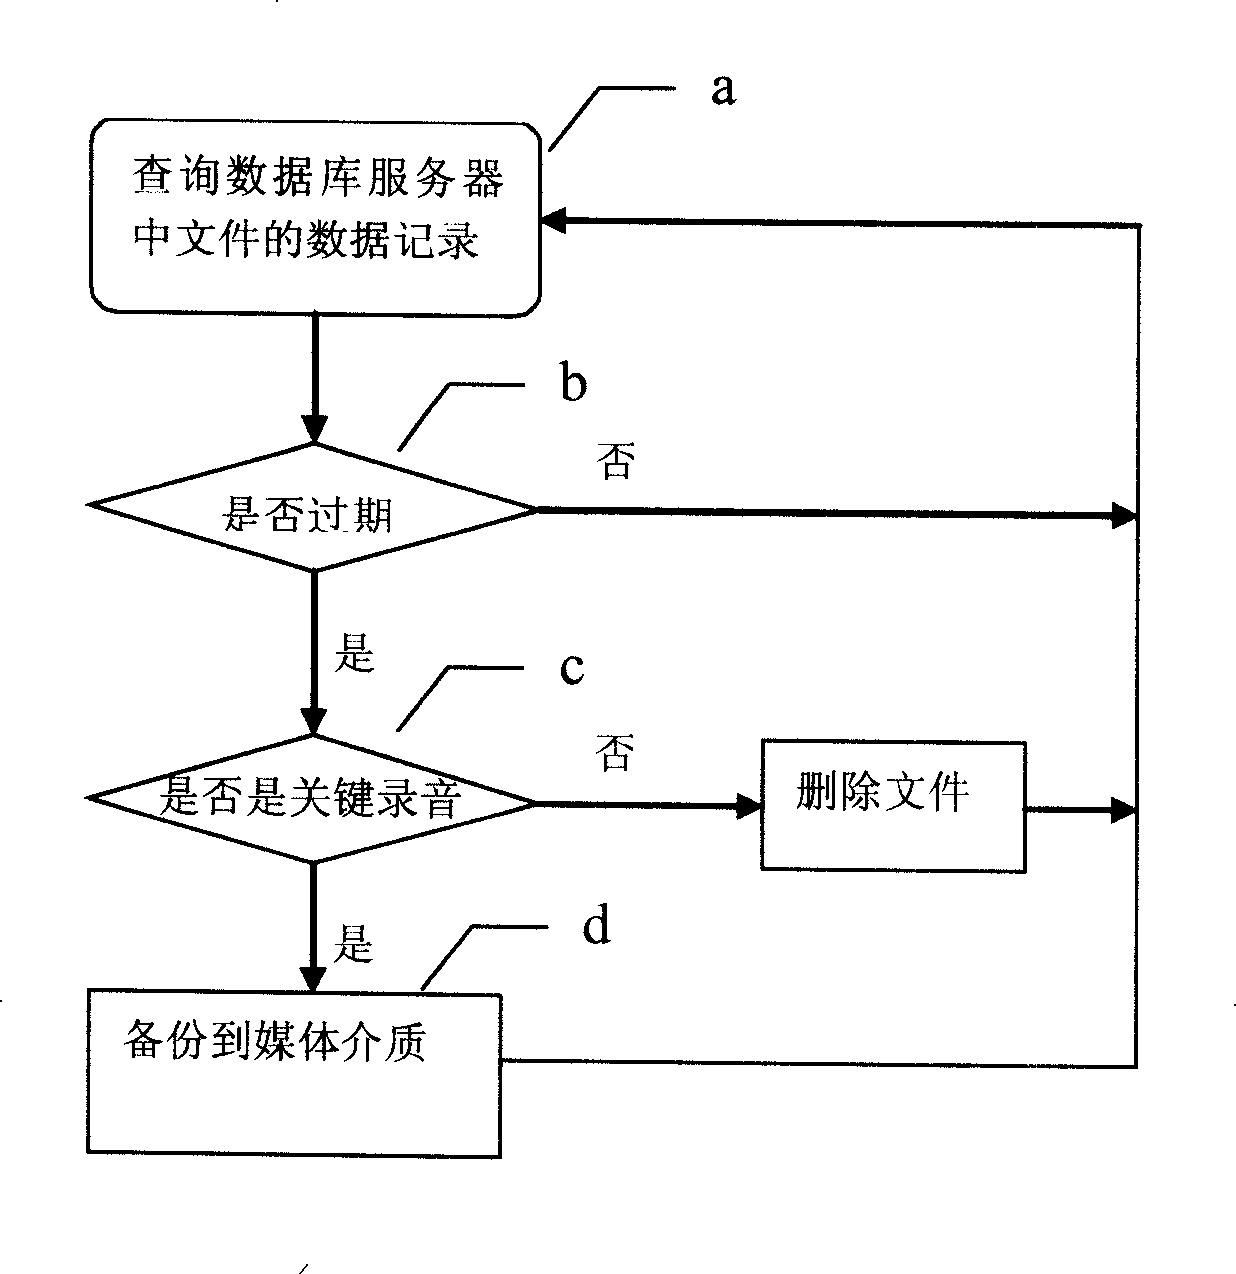 Recording file backup system and method